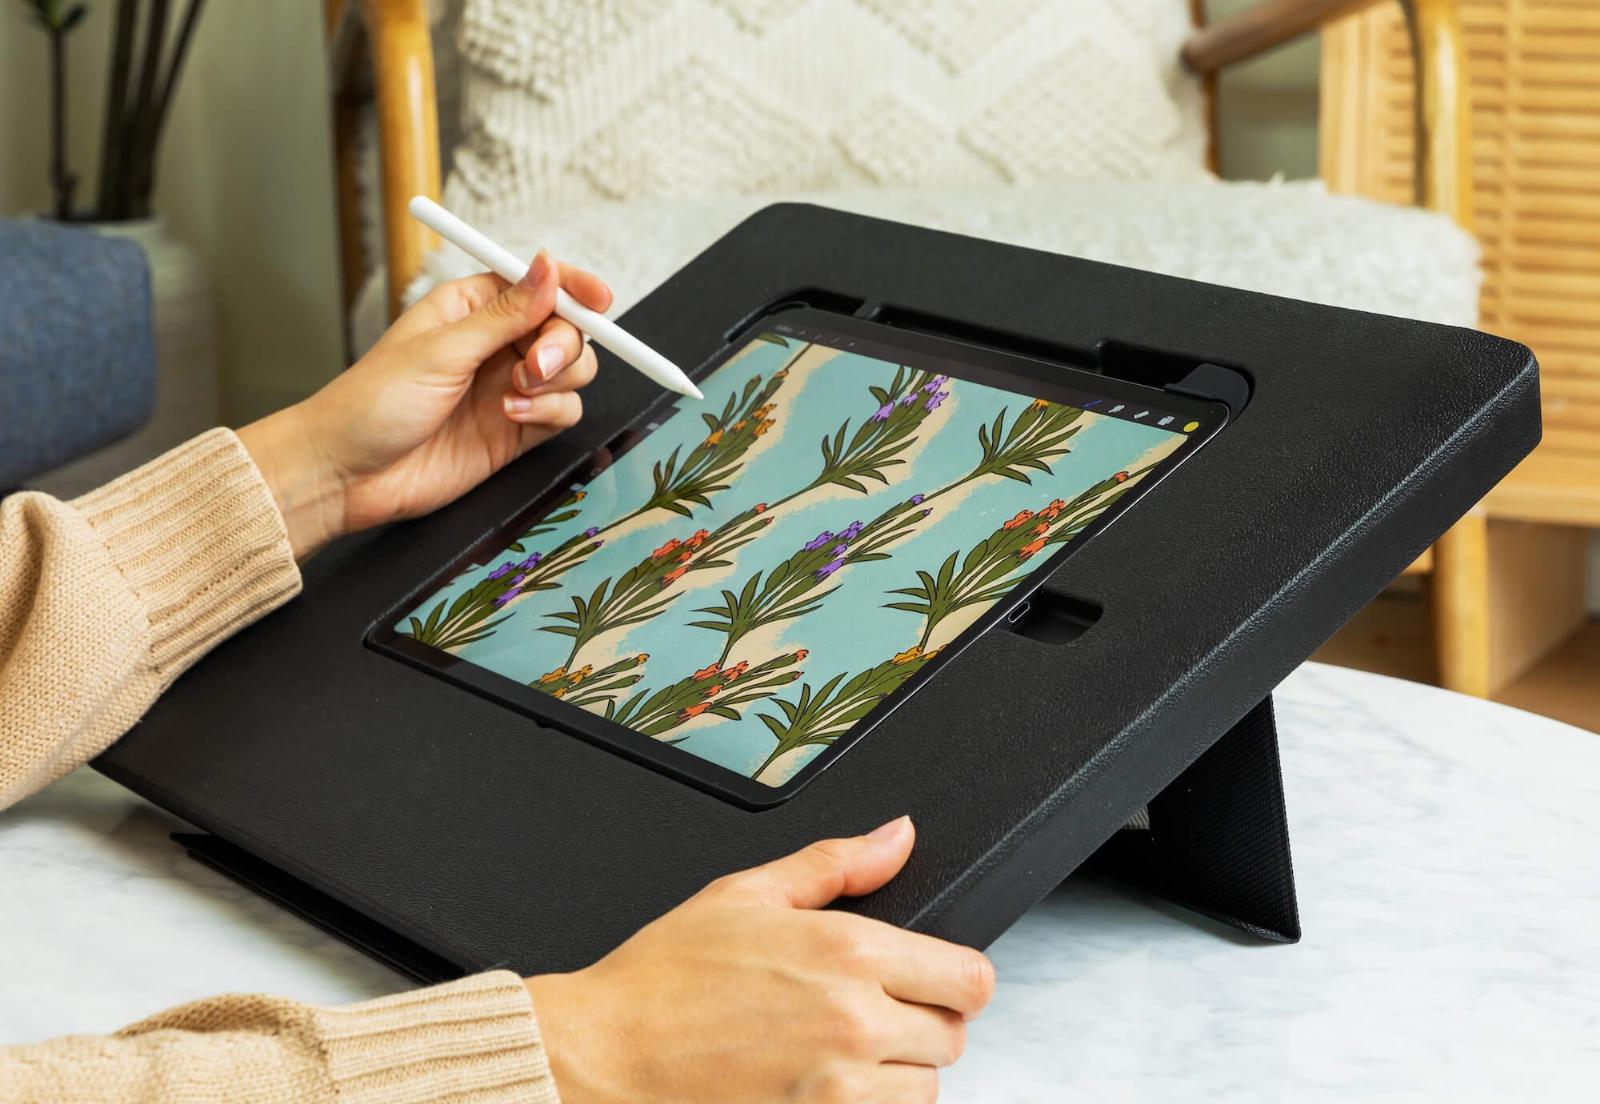 Astropad returns with a $120 iPad drawing stand